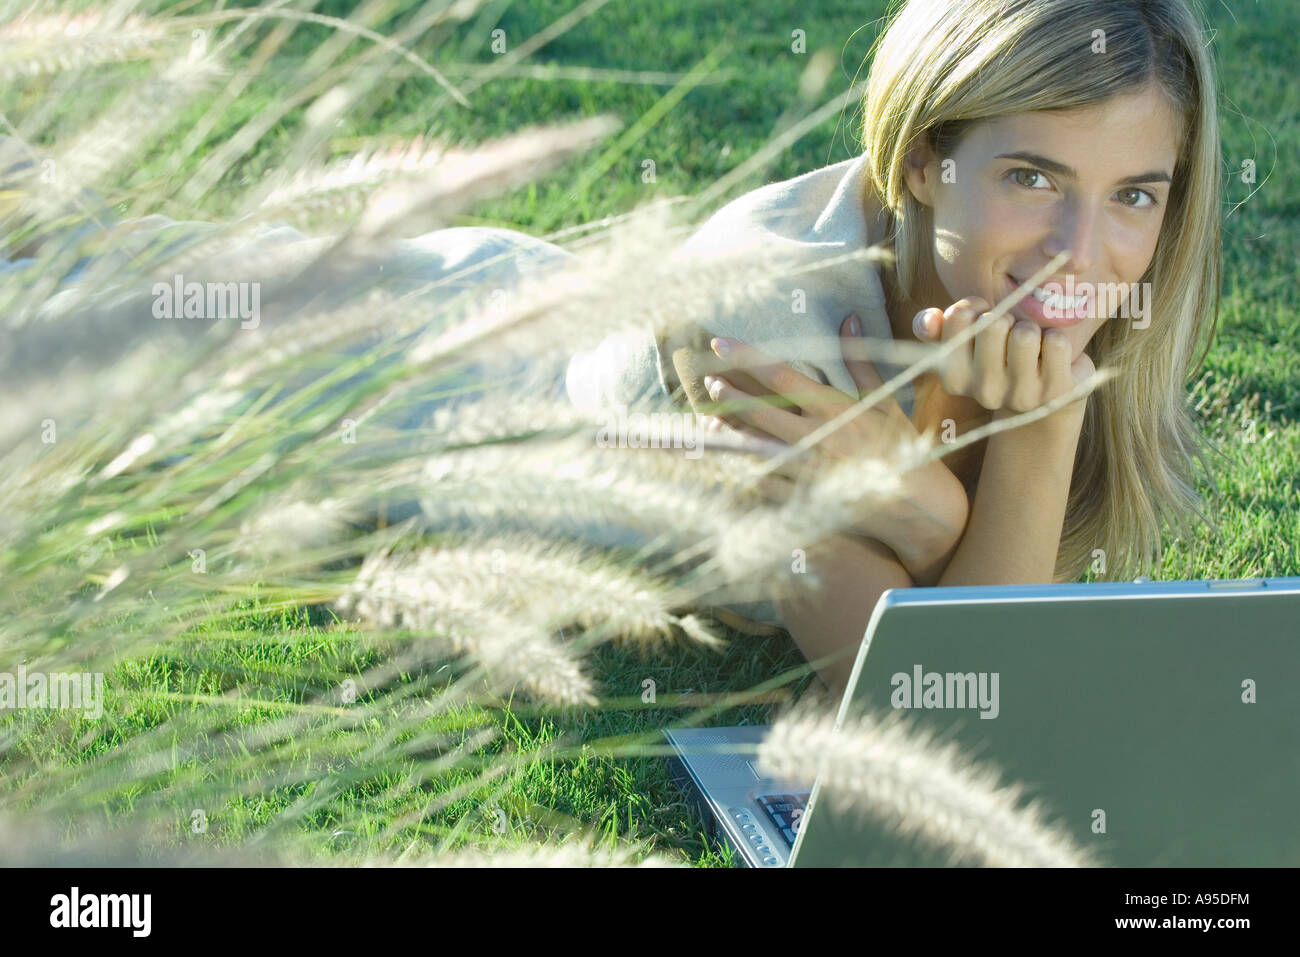 Young woman lying in field with laptop Stock Photo